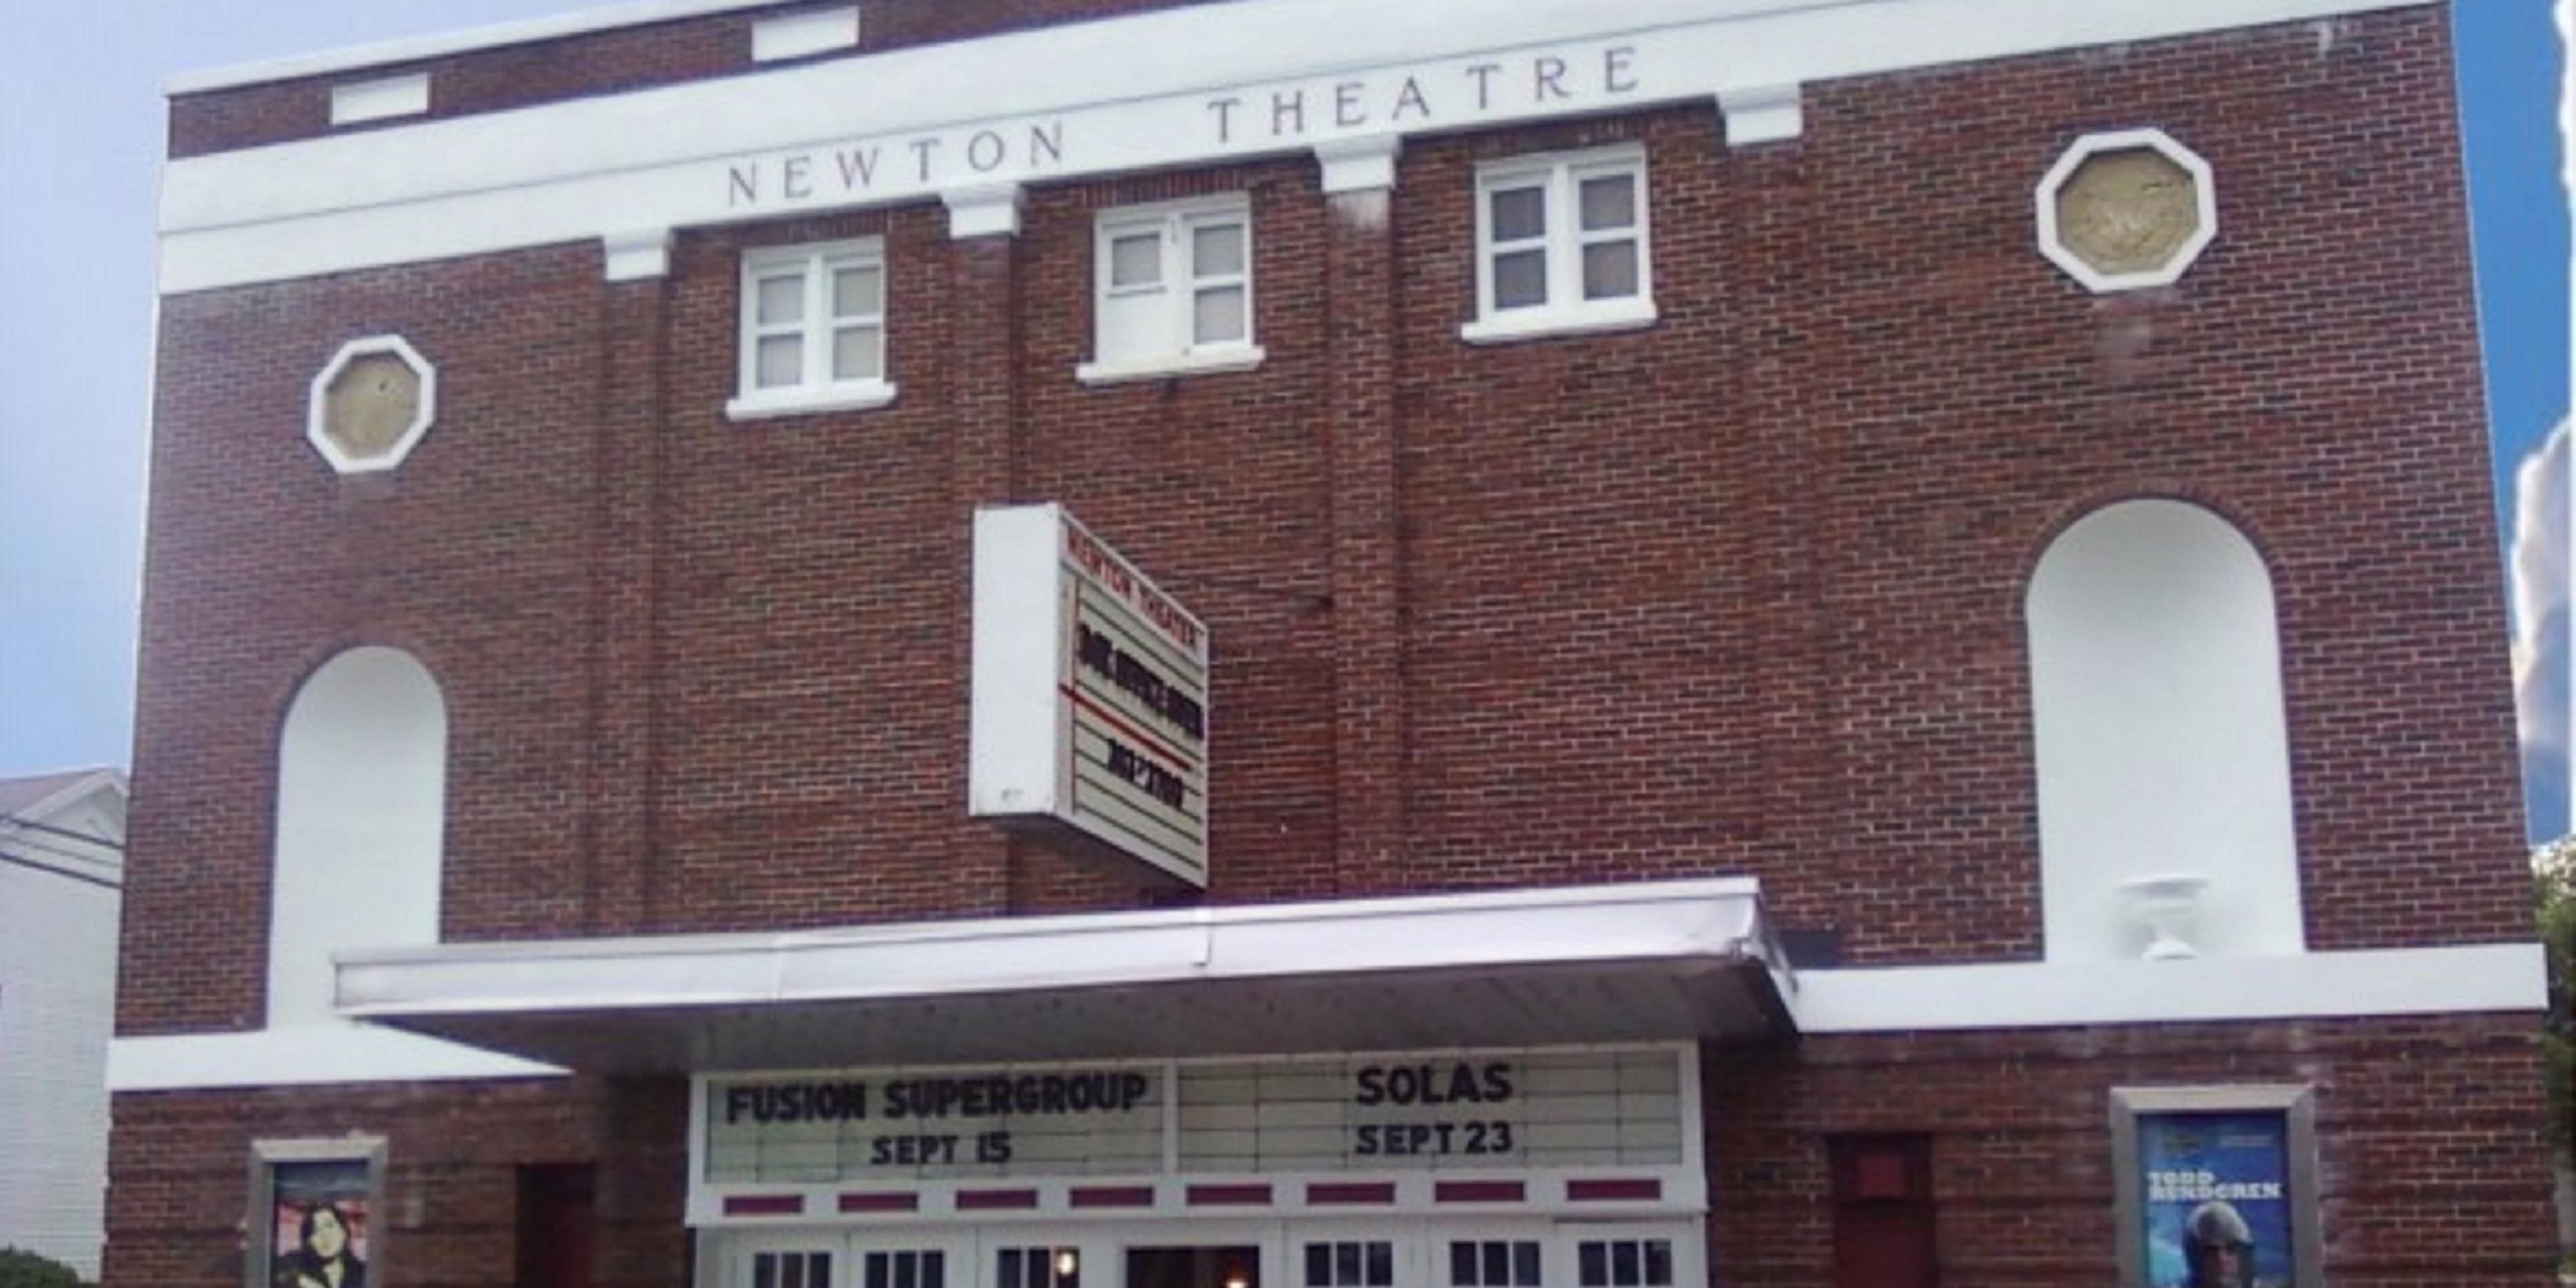 We are only 5 minutes from the Historic Newton Theatre. This 605-seat venue in a restored 1923 building features concerts, comics & other live performances. 